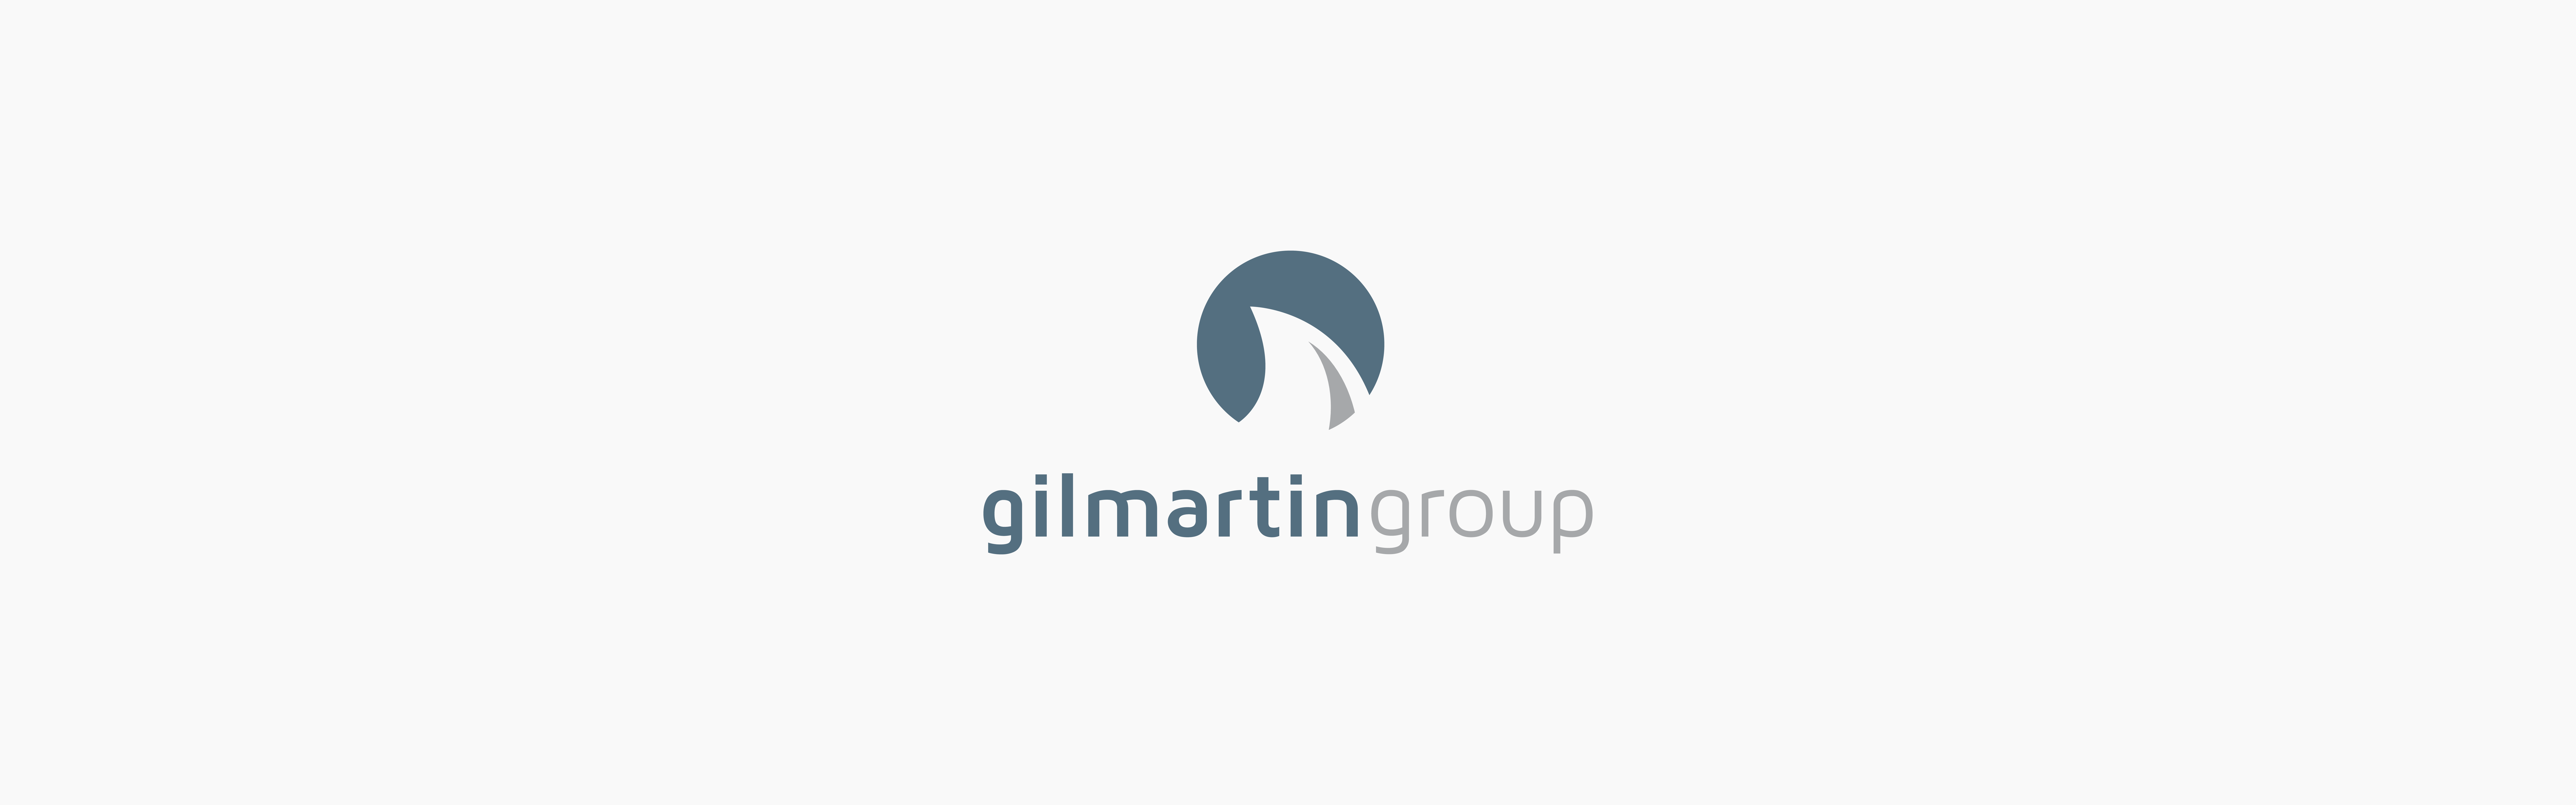 The image displays the logo of Gilmartin Group, consisting of a stylized, abstract shape above the text "Gilmartin Group".